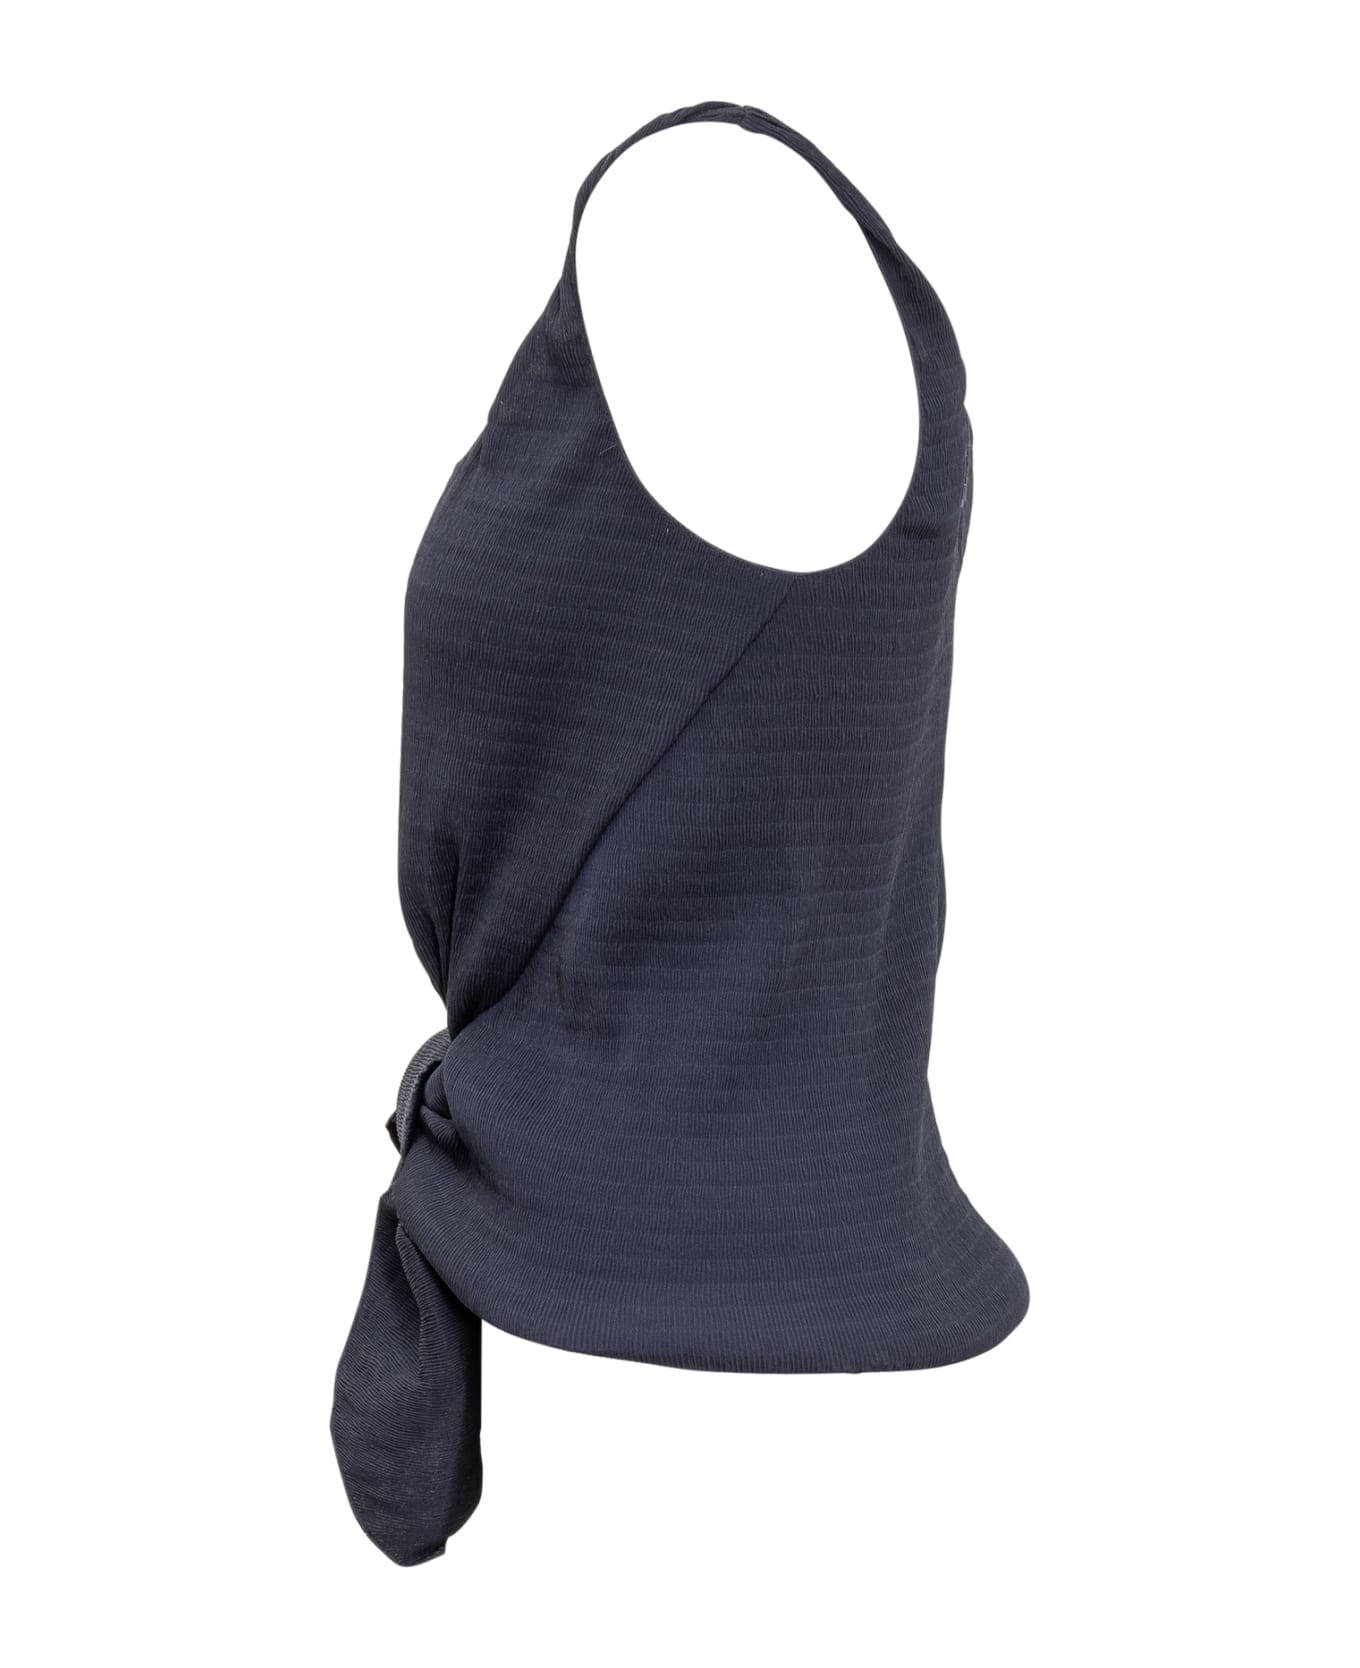 J.W. Anderson Top With Straps And Knotted Detail - NAVY